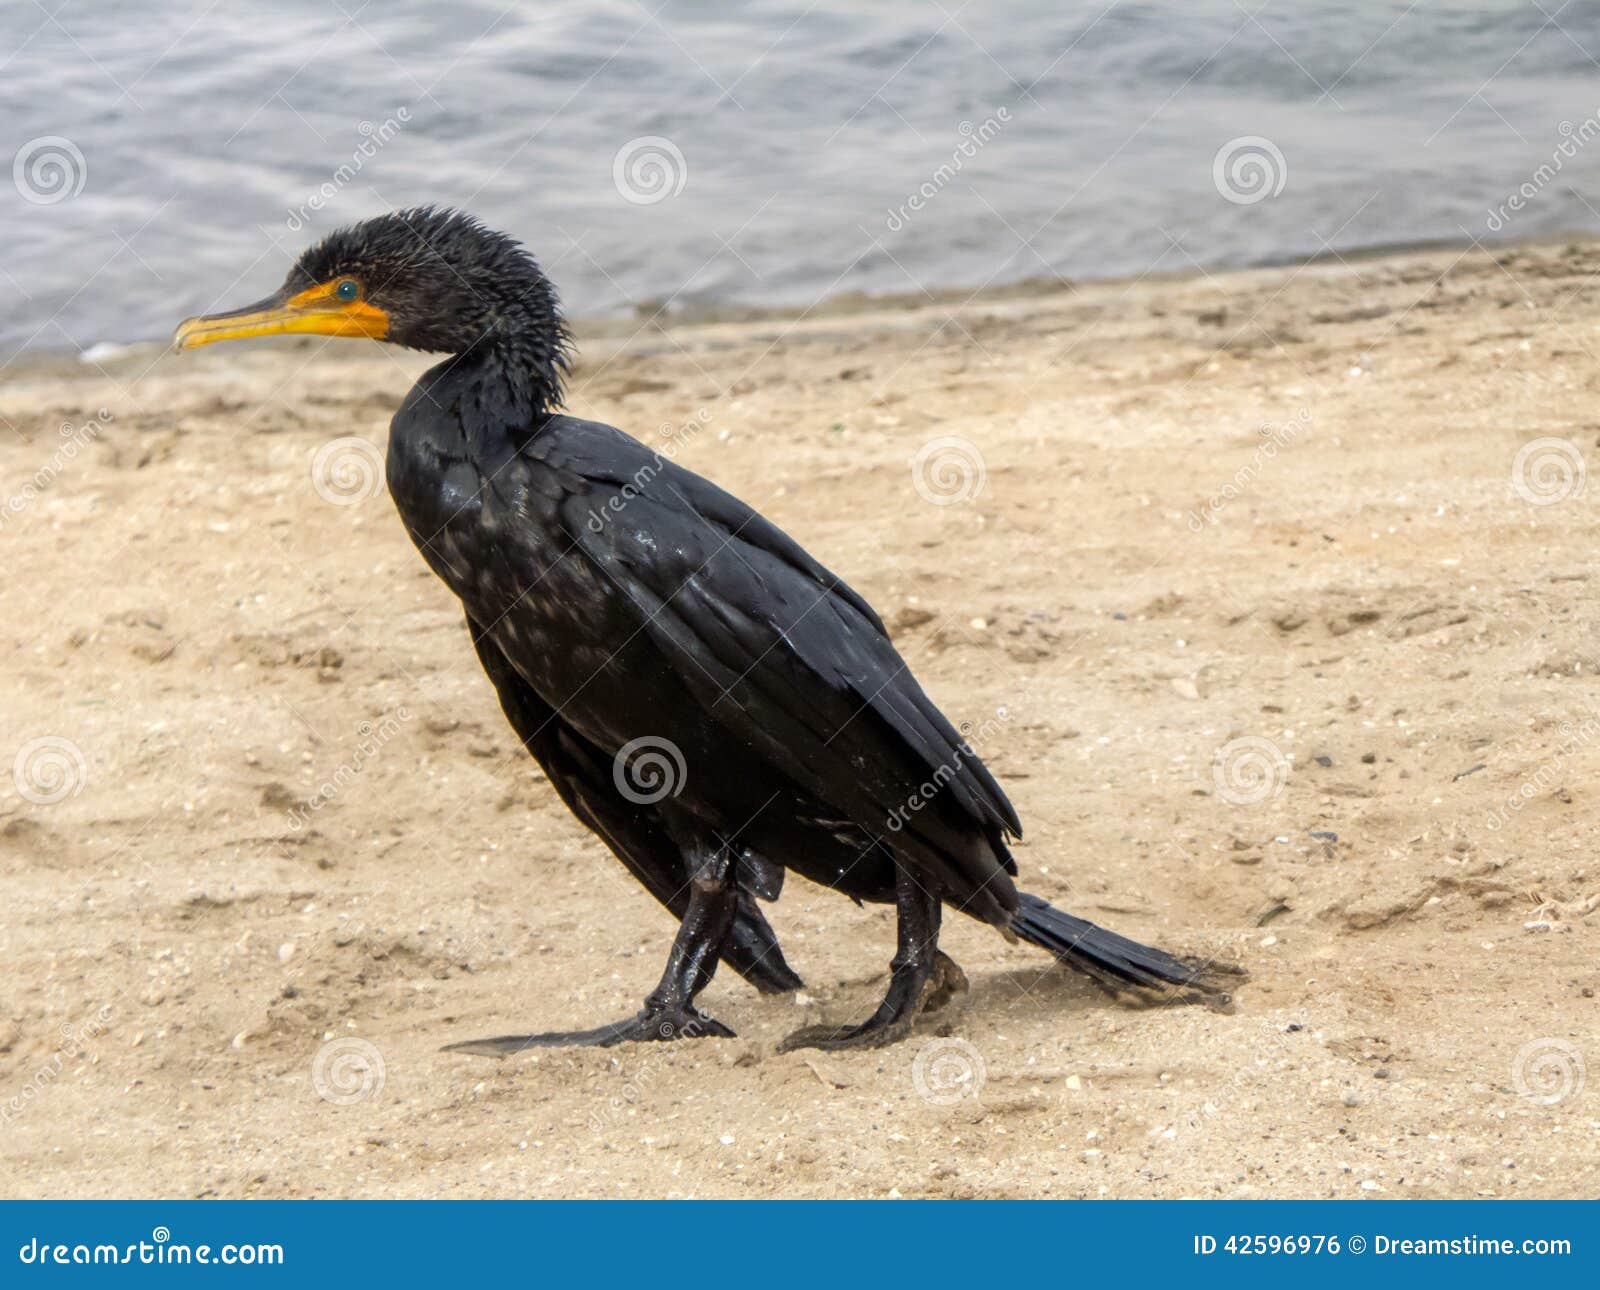 Injured black duck. Ducks are a seabird that ah suffered greatly from pollution. Here is observed at the seashore wounded.